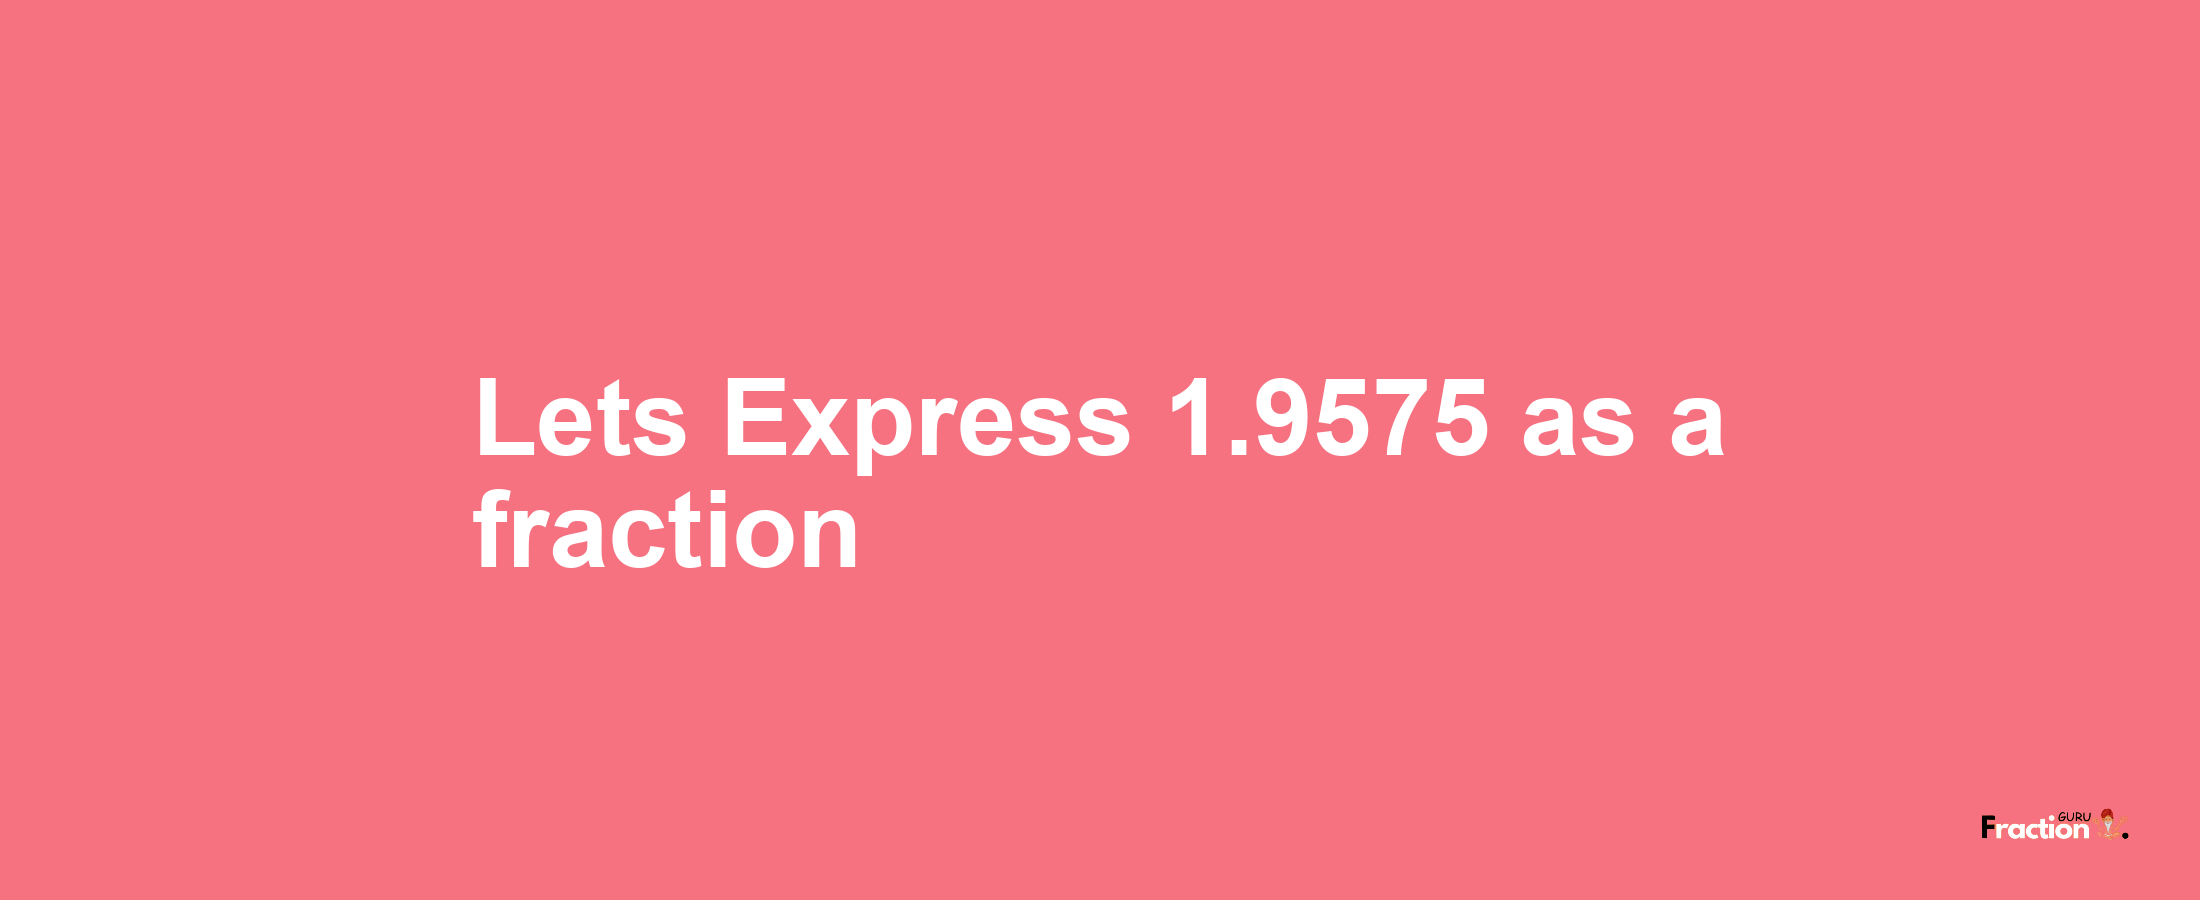 Lets Express 1.9575 as afraction